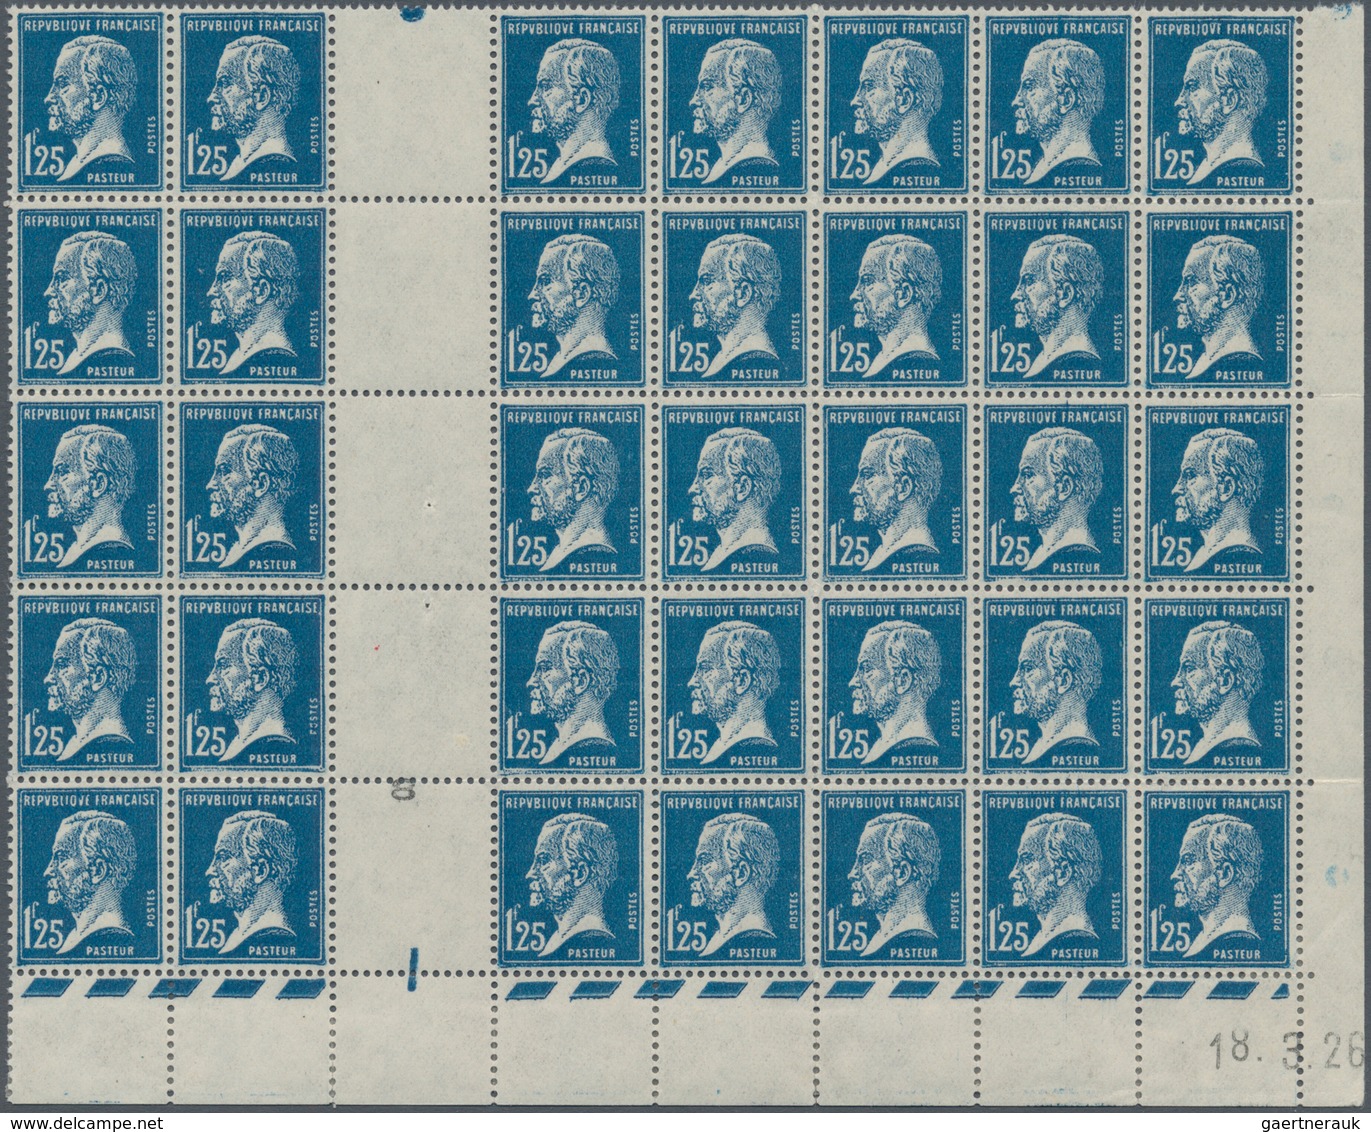 Frankreich: 1926, Pasteur 1.25fr. Blue Block Of 35 With Gutter And Printing Date ‚18.3.26‘, MNH (one - Covers & Documents